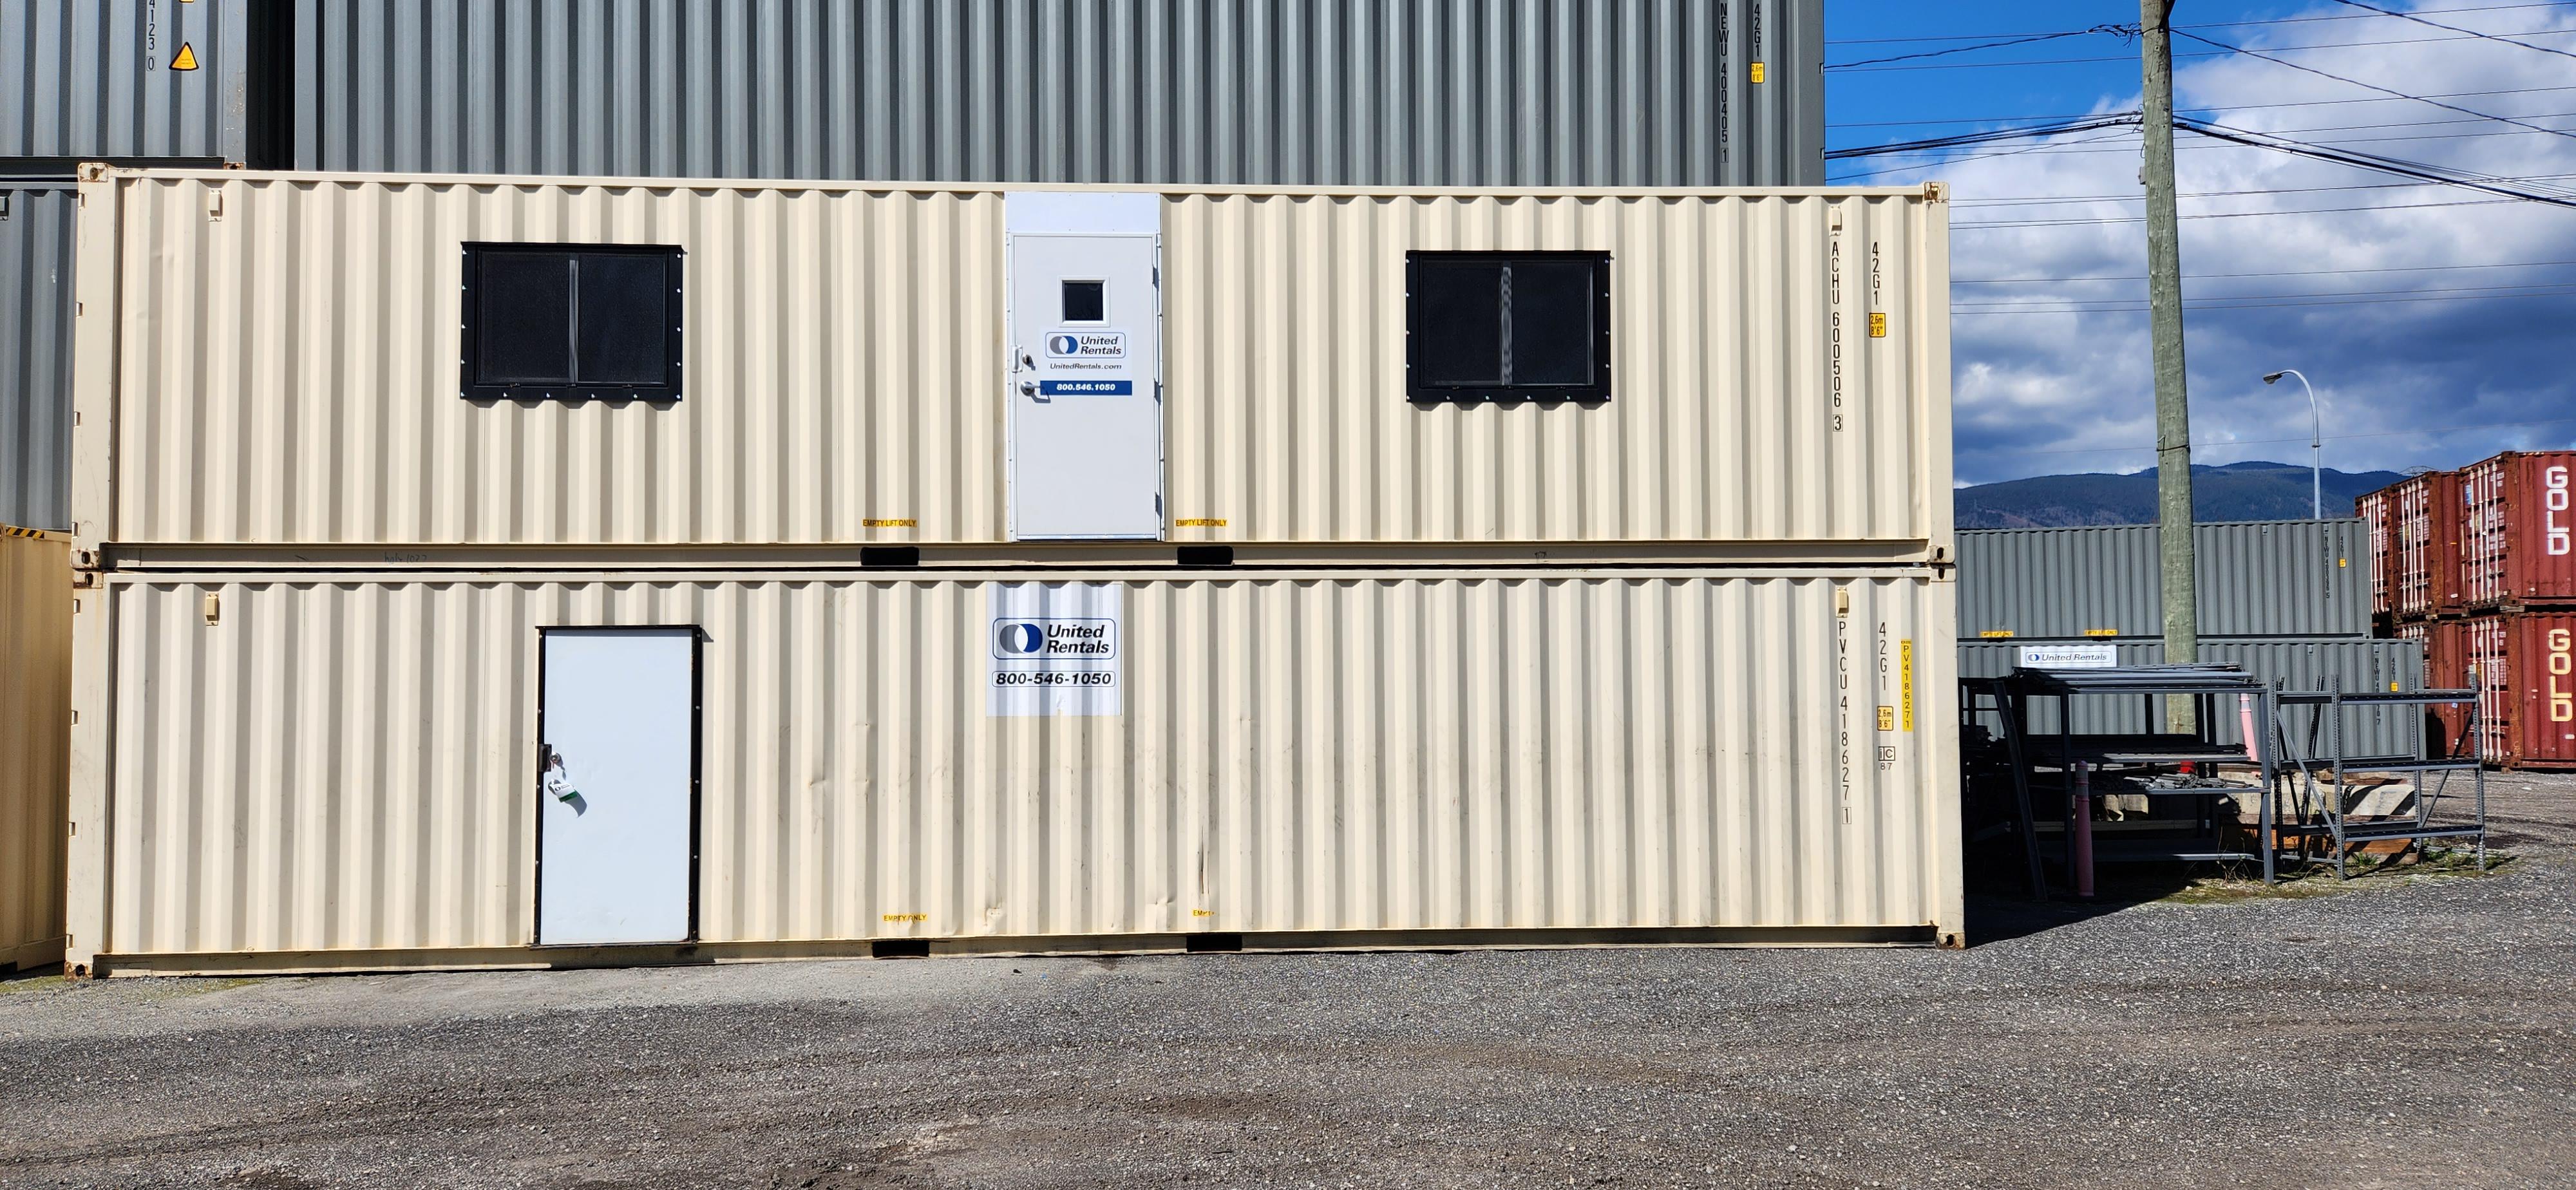 Foto de United Rentals - Storage Containers and Mobile Offices